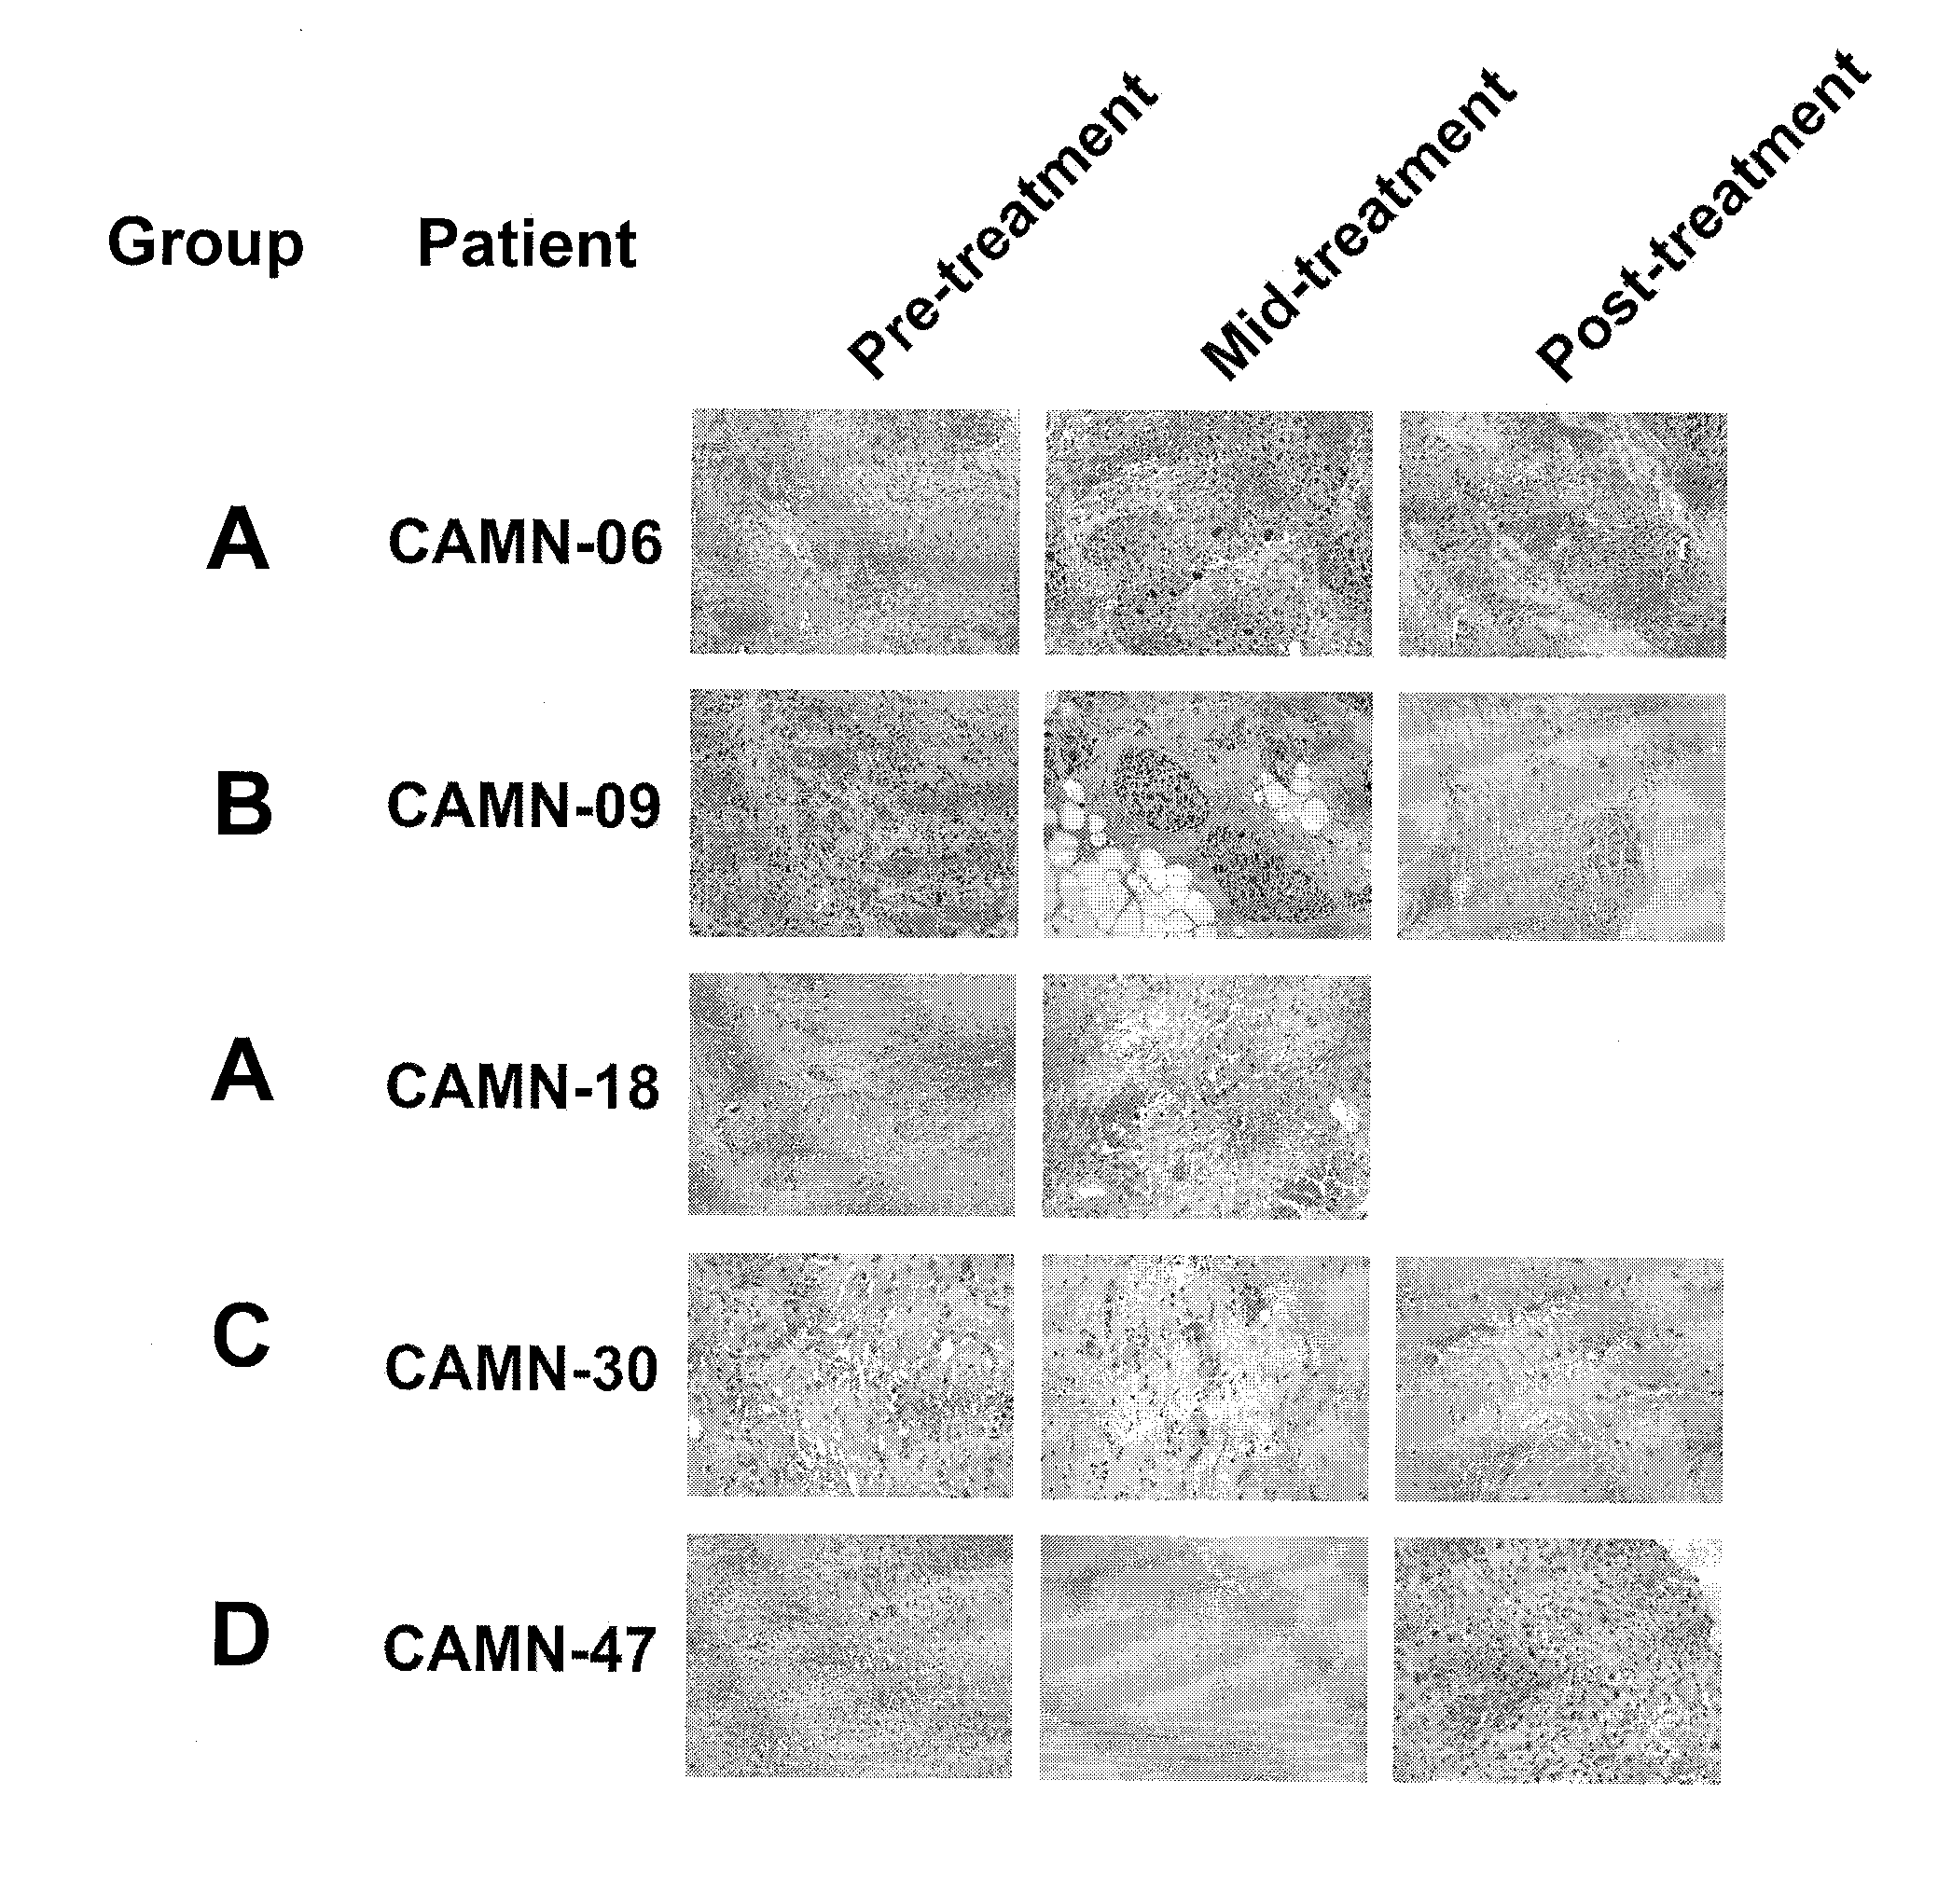 Method of using tumour RNA integrity to measure response to chemotherapy in cancer patients